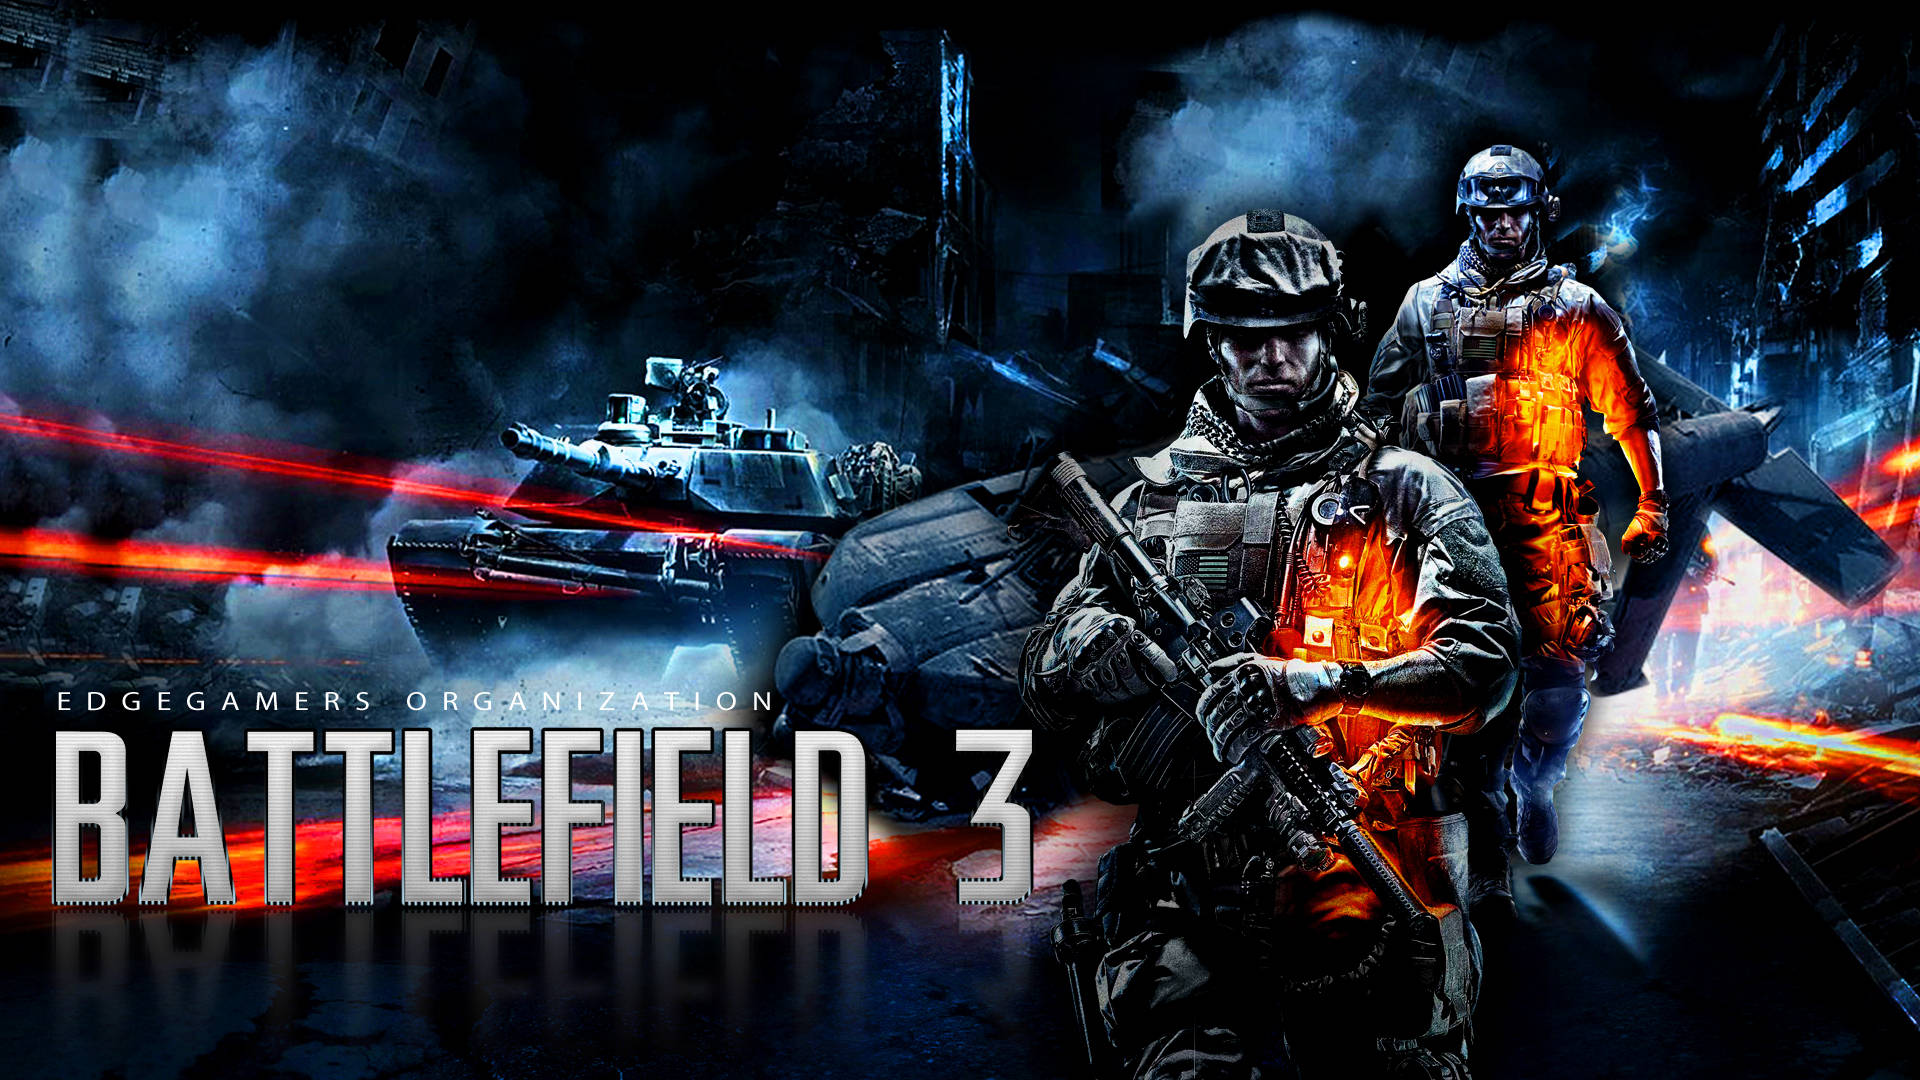 Battlefield 3 Abstract Poster Background